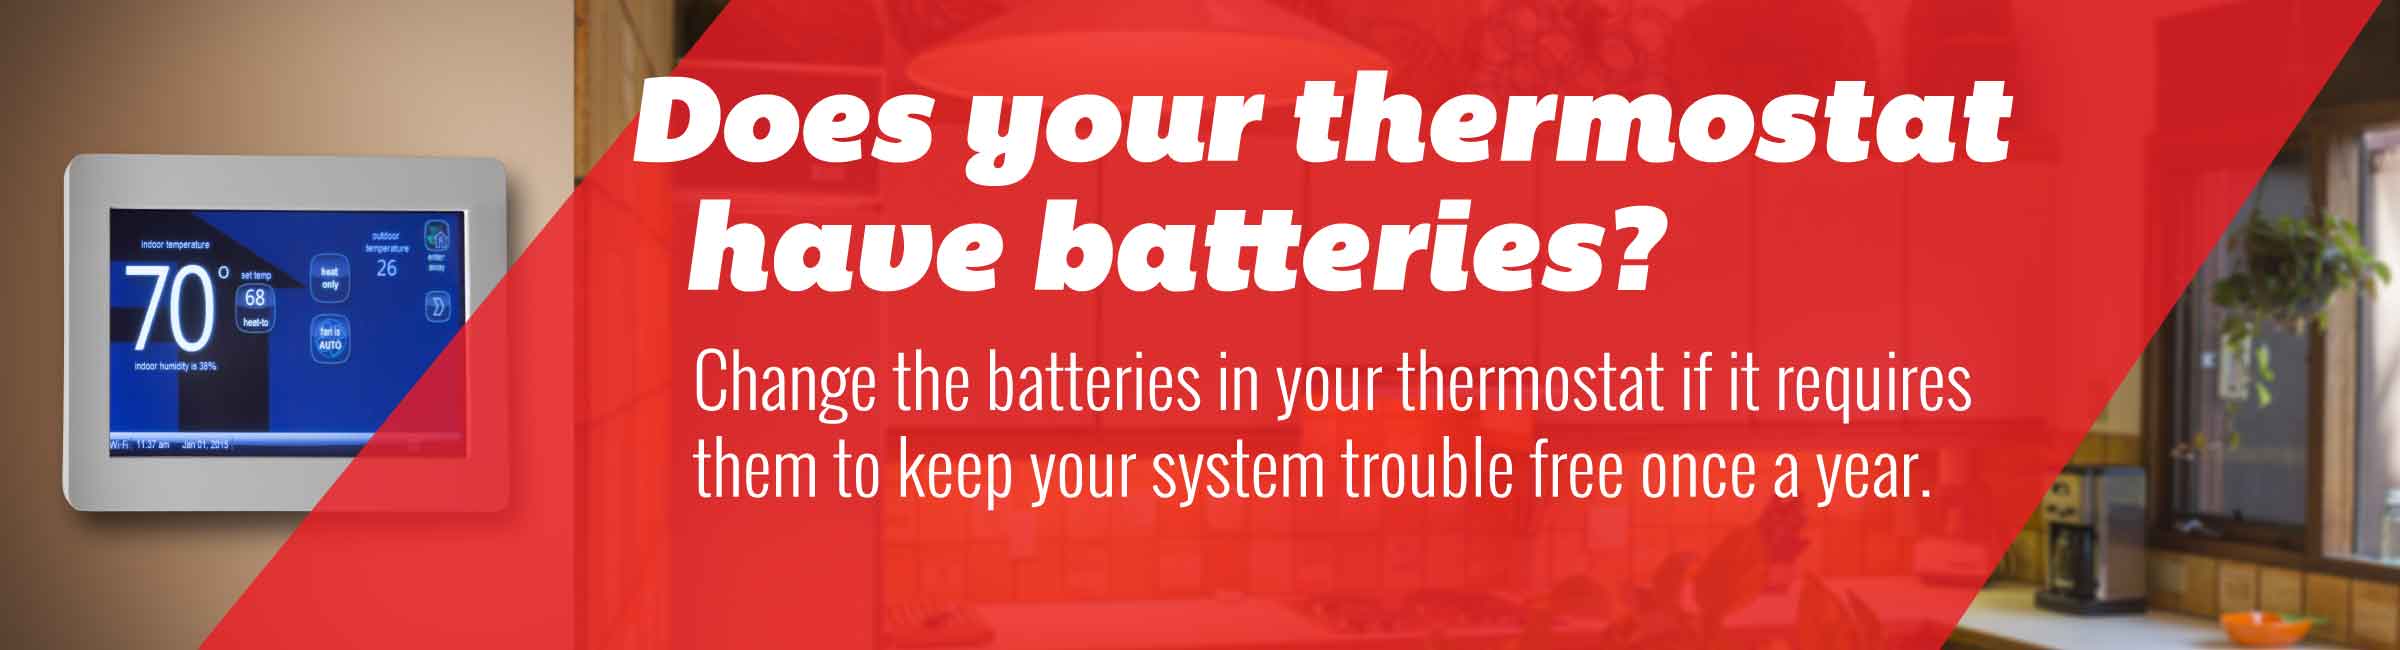 Tip:Change the batteries in your thermostat if it requires them to keep your system trouble free once a year.